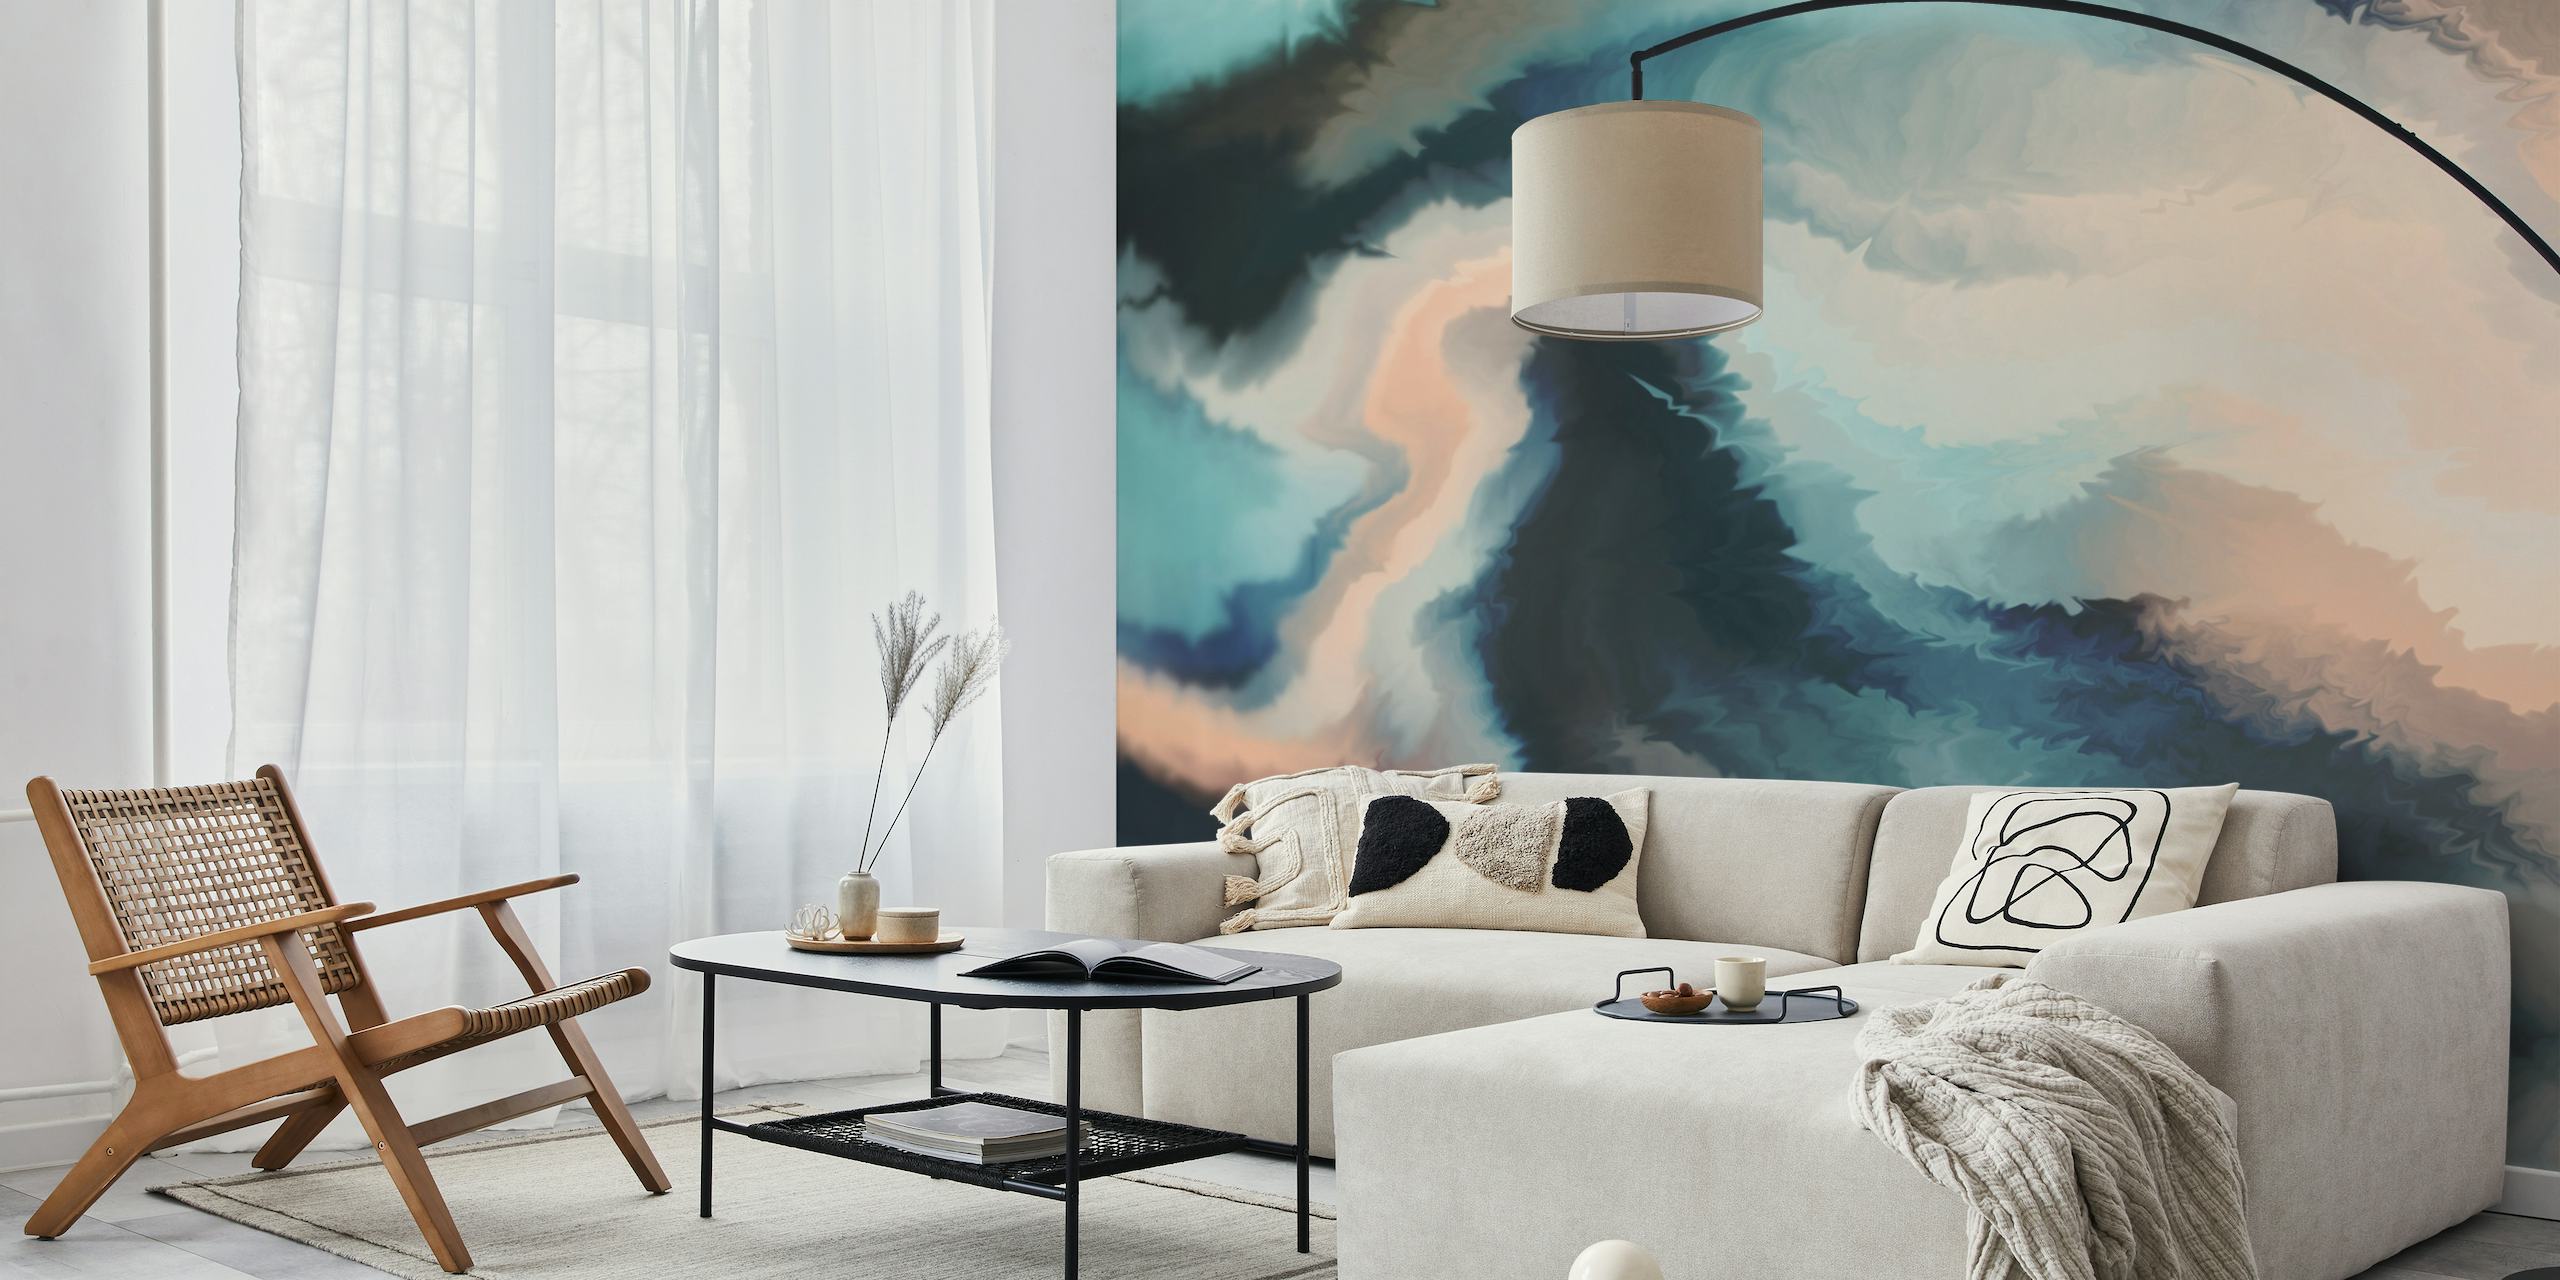 Abstract ocean waves wall mural in shades of blue and turquoise, evoking a serene sea ambiance